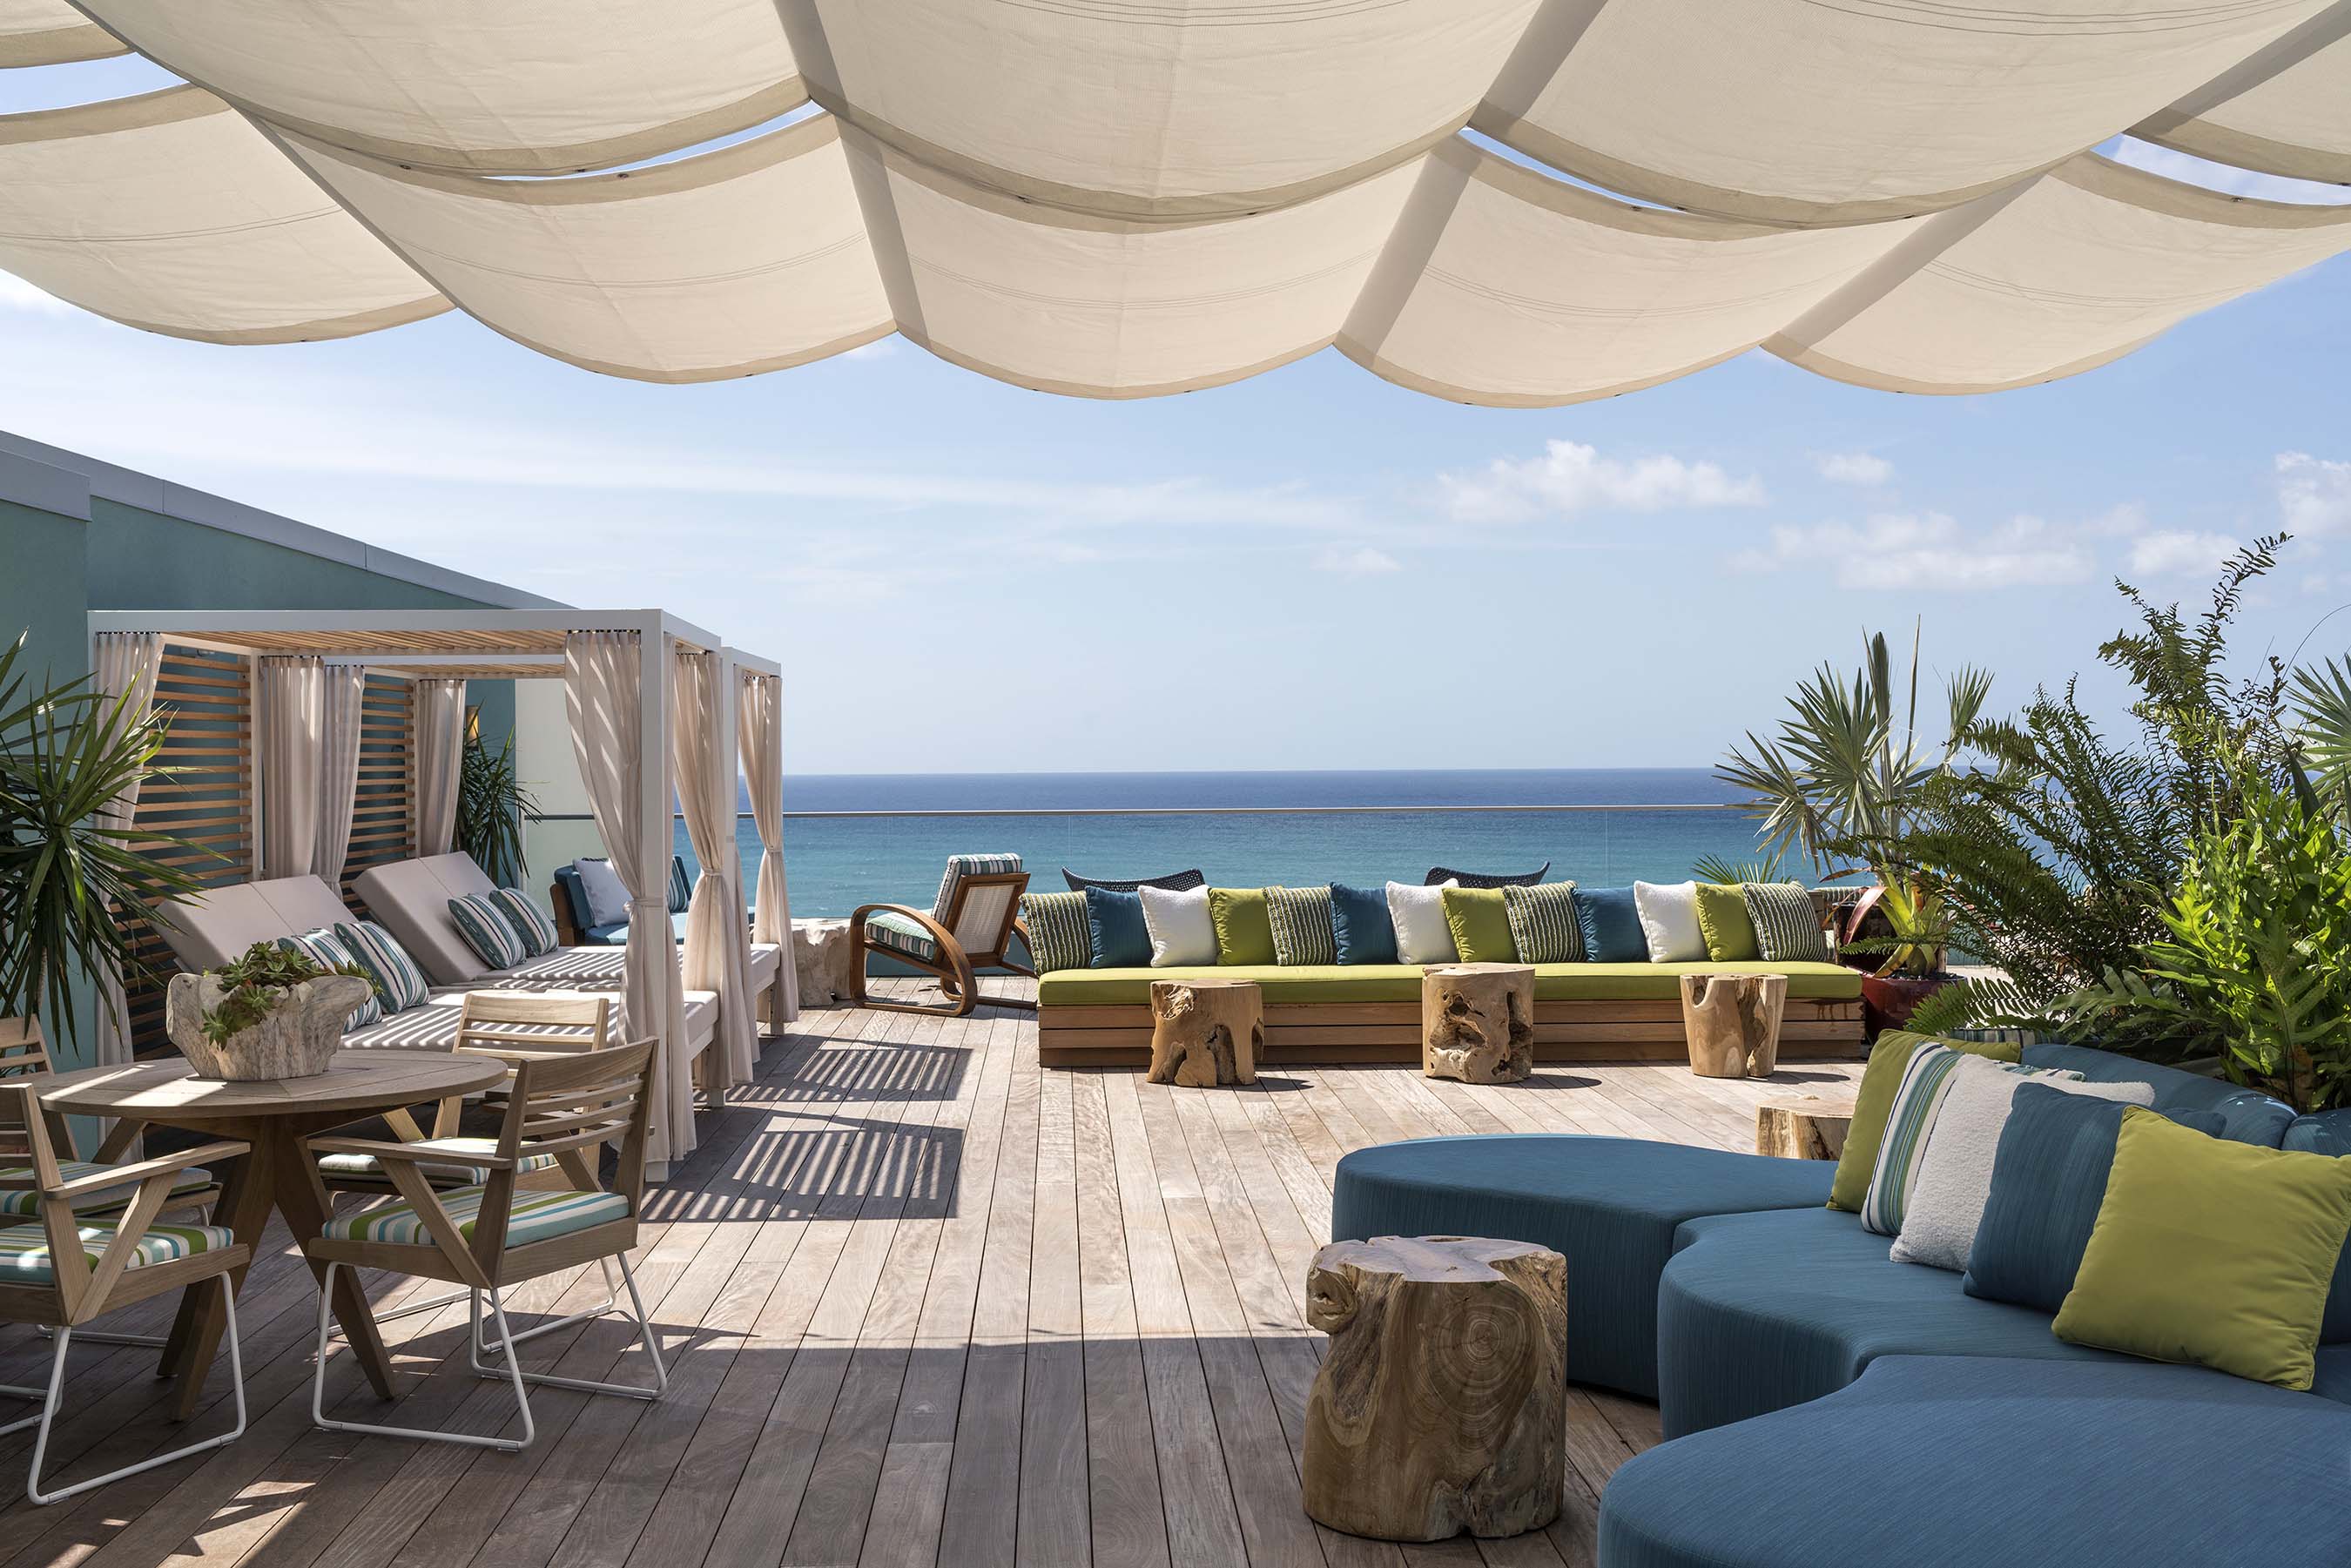 The Residences at Seafire’s rooftop entertaining space "The Nest," with 360-degree views of the Caribbean Sea and North Sound, exclusively for residents